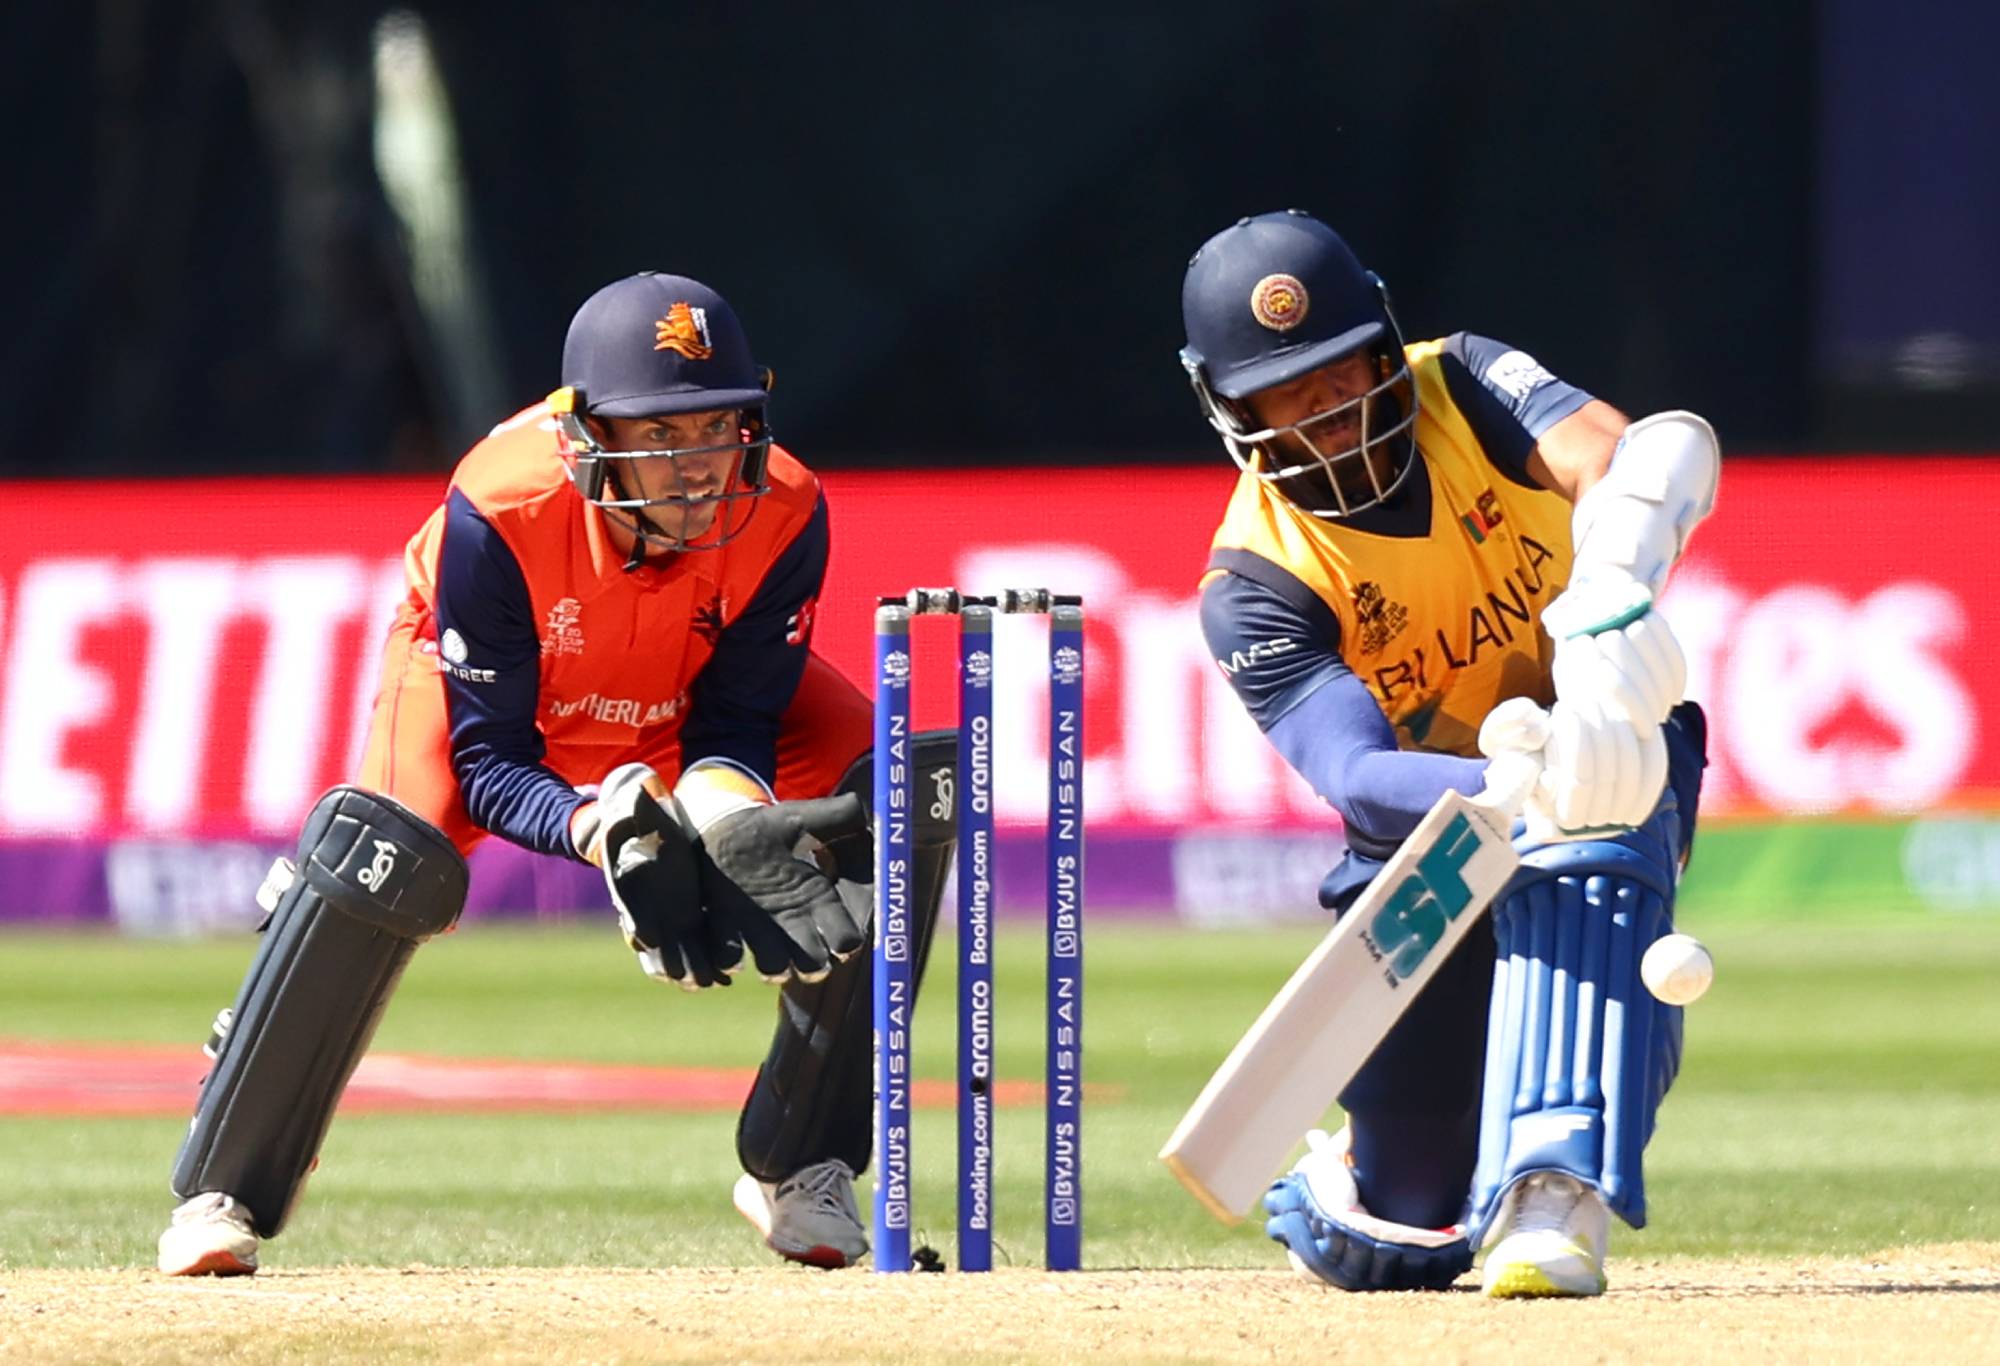 GEELONG, AUSTRALIA - OCTOBER 20: Kusal Mendis of Sri Lanka bats during the ICC Men's T20 World Cup match between Sri Lanka and the Netherlands at GMHBA Stadium on October 20, 2022 in Geelong, Australia. (Photo by Graham Denholm-ICC/ICC via Getty Images,)